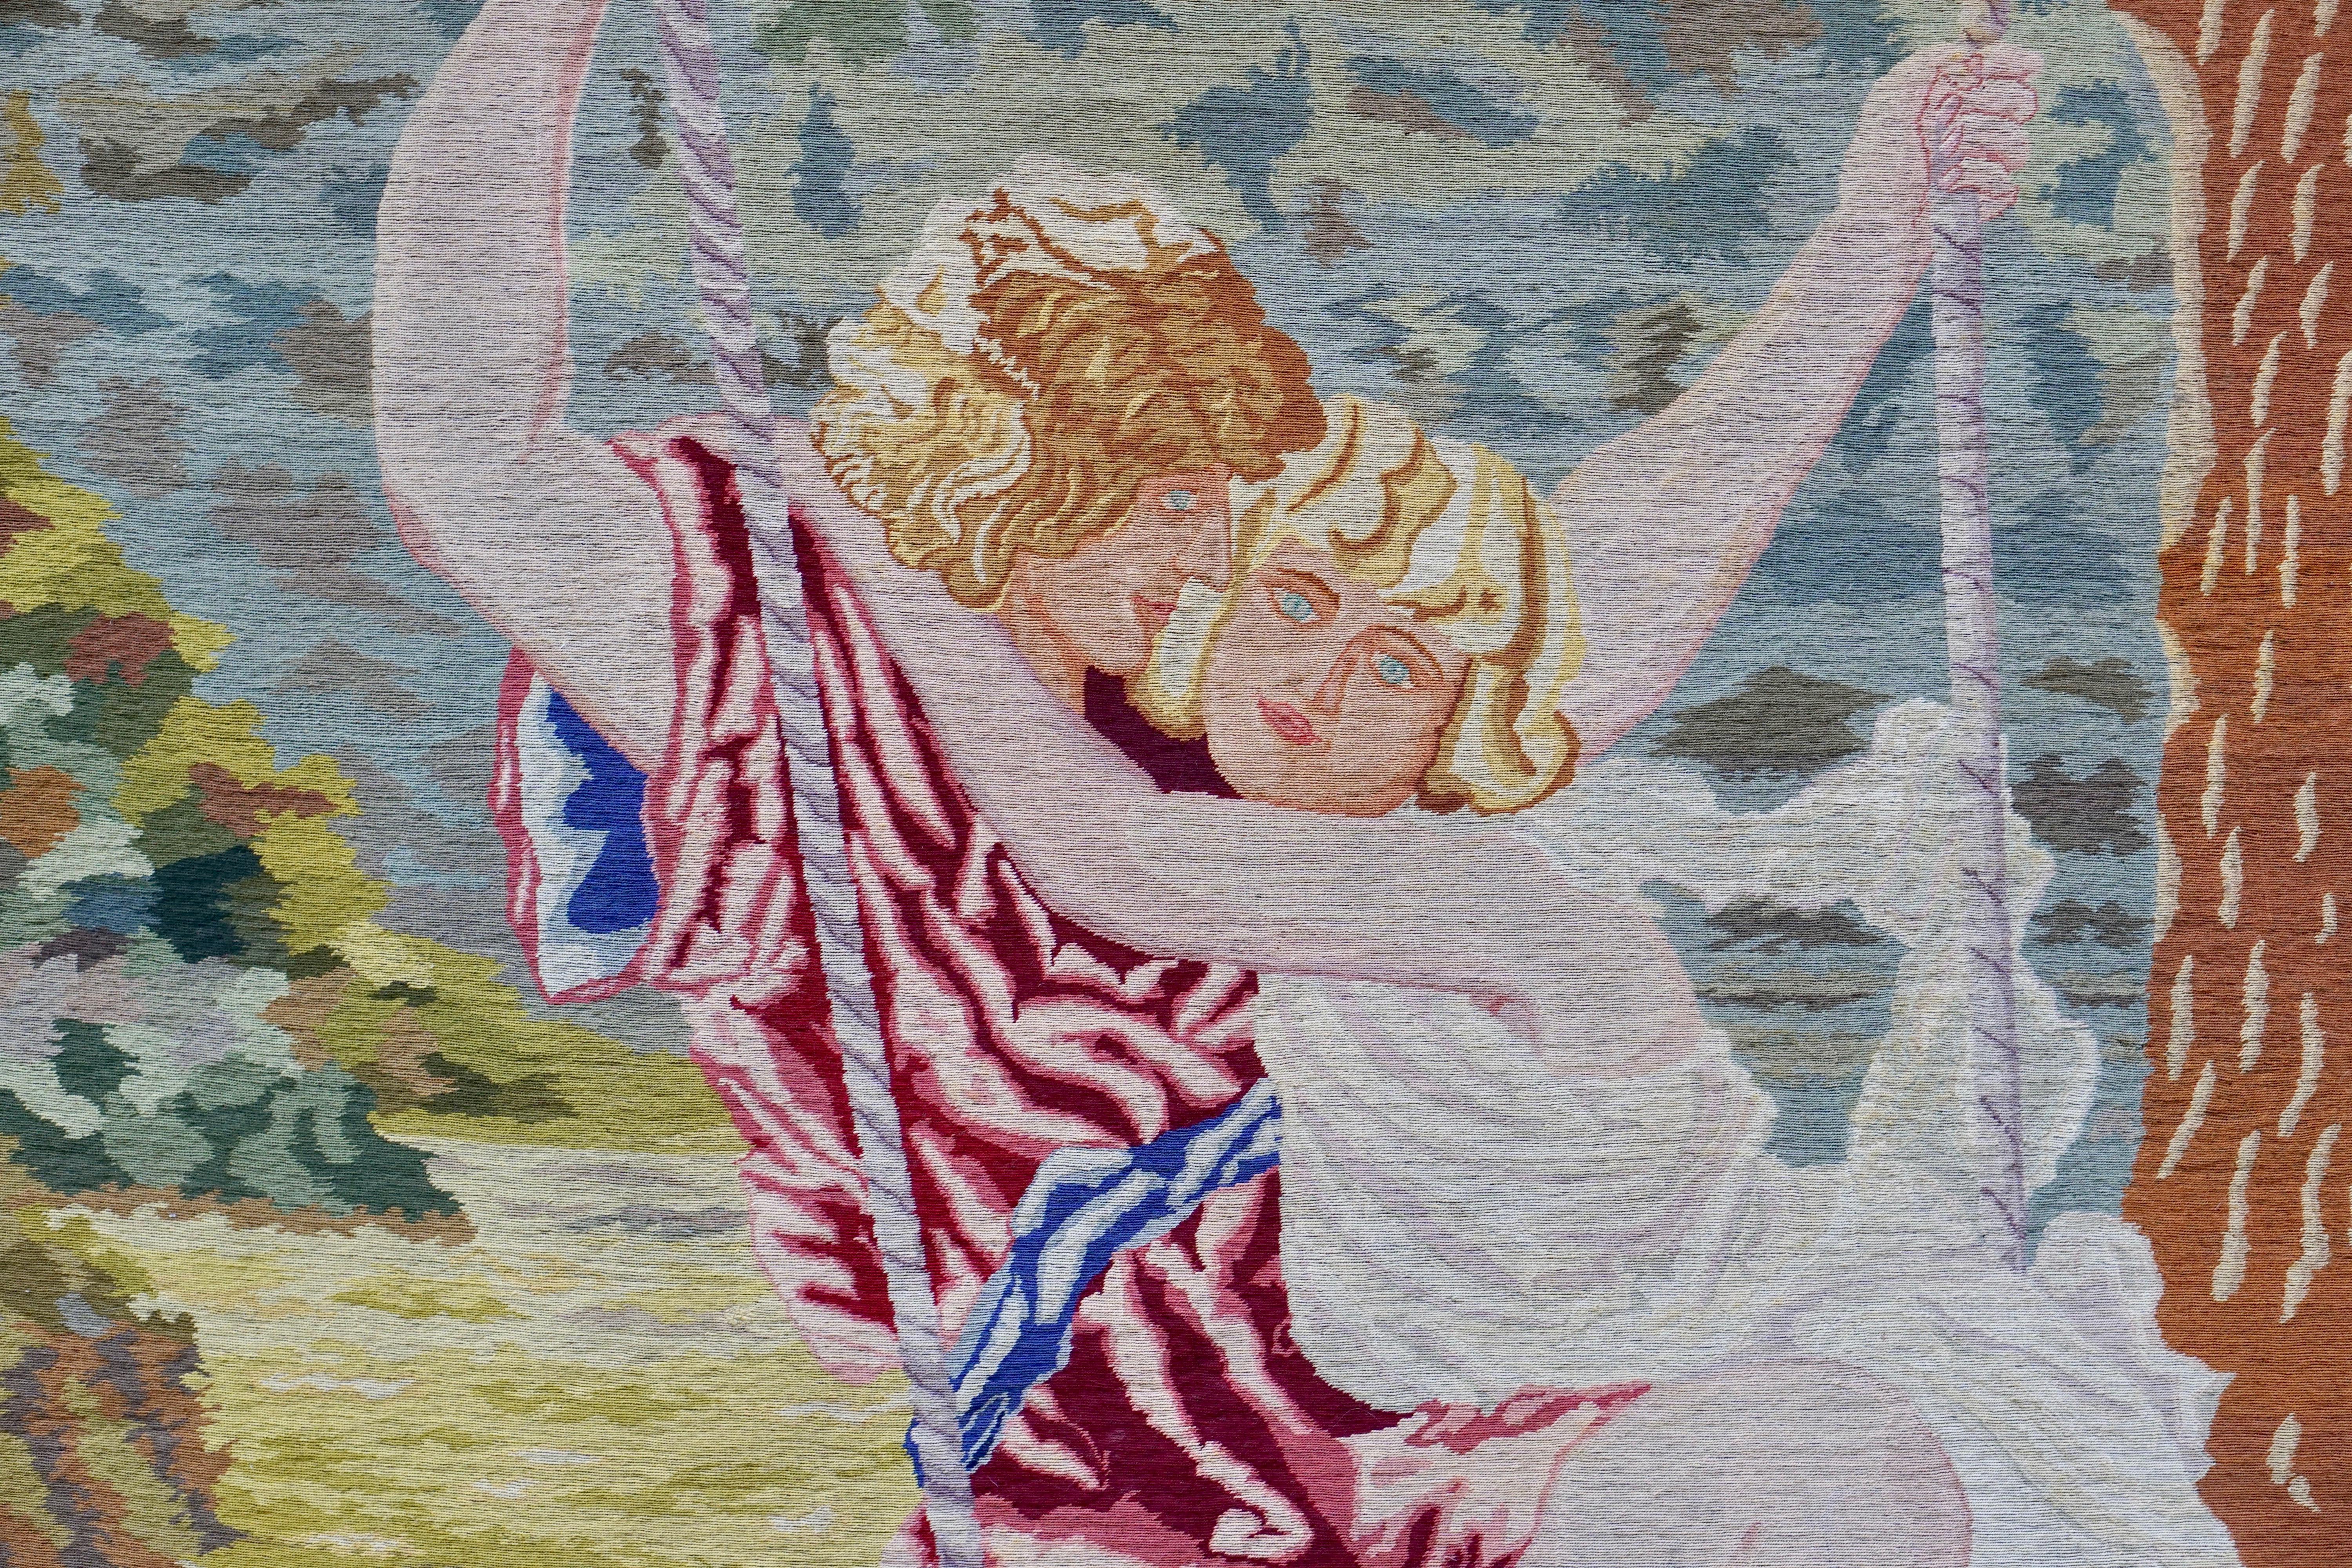 Romantic Art Nouveau Tapestry or Wall Hanging Representing Two Lovers in a Swing (Art nouveau)